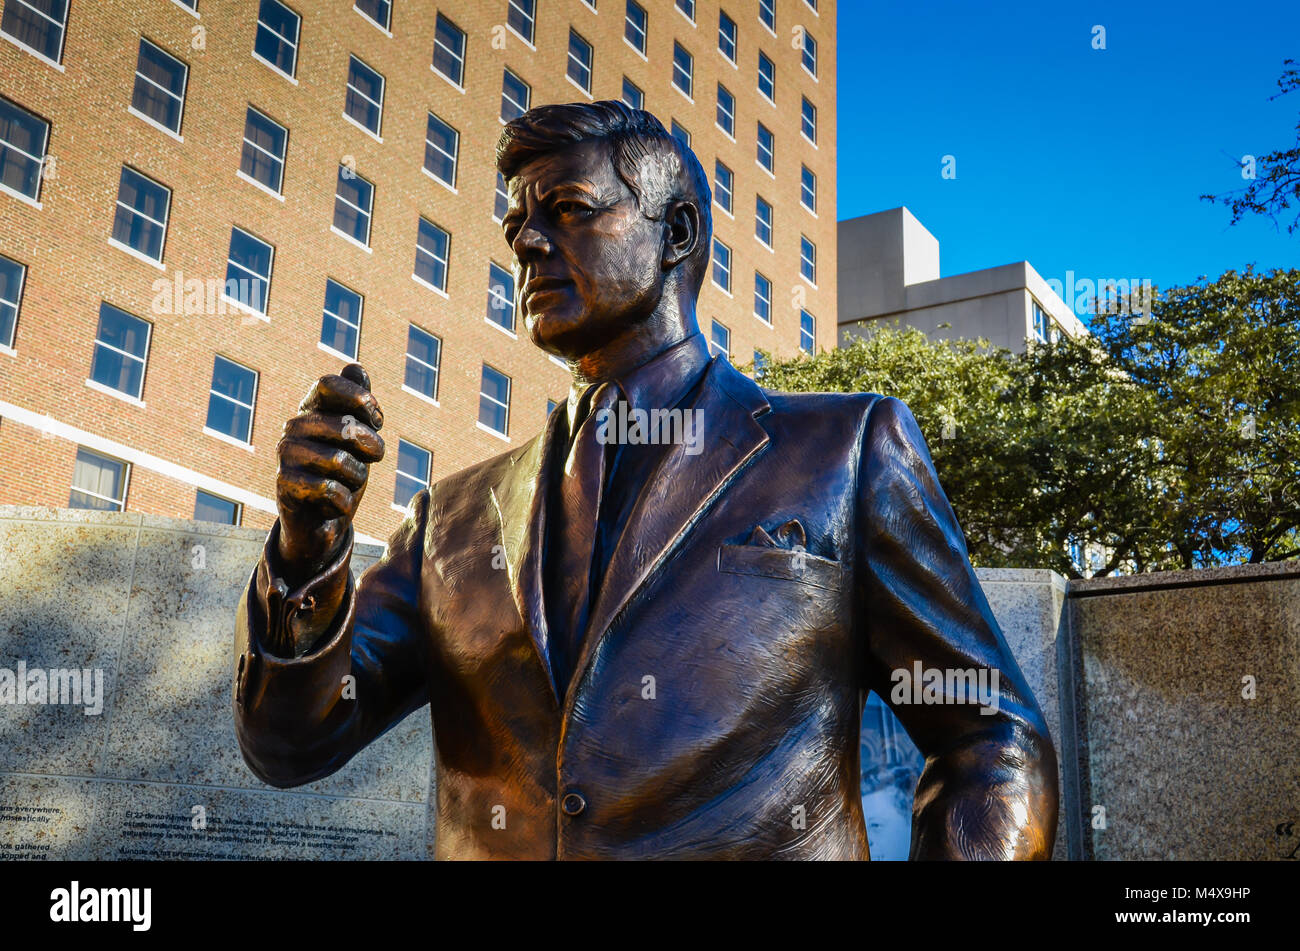 John Fitzgerald Kennedy Memorial Garden - bronze statue and monument in Fort Worth, Texas commemorates the president's last day on earth. Stock Photo